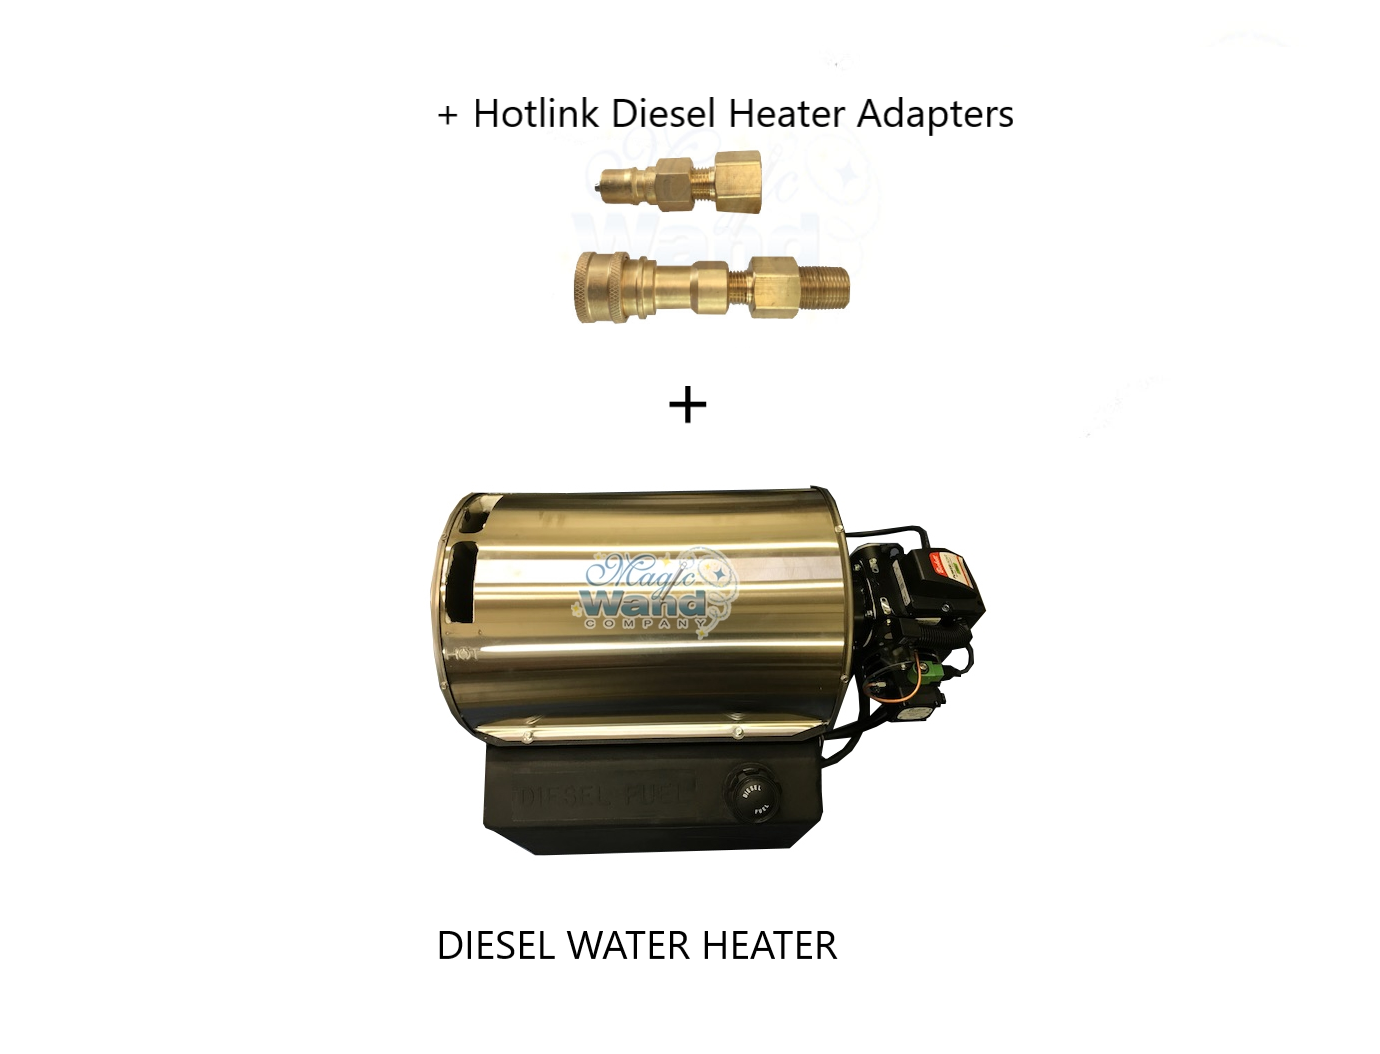 https://www.magicwandcompany.com/wp-content/uploads/2019/05/DIESEL-WATER-HEATER.png